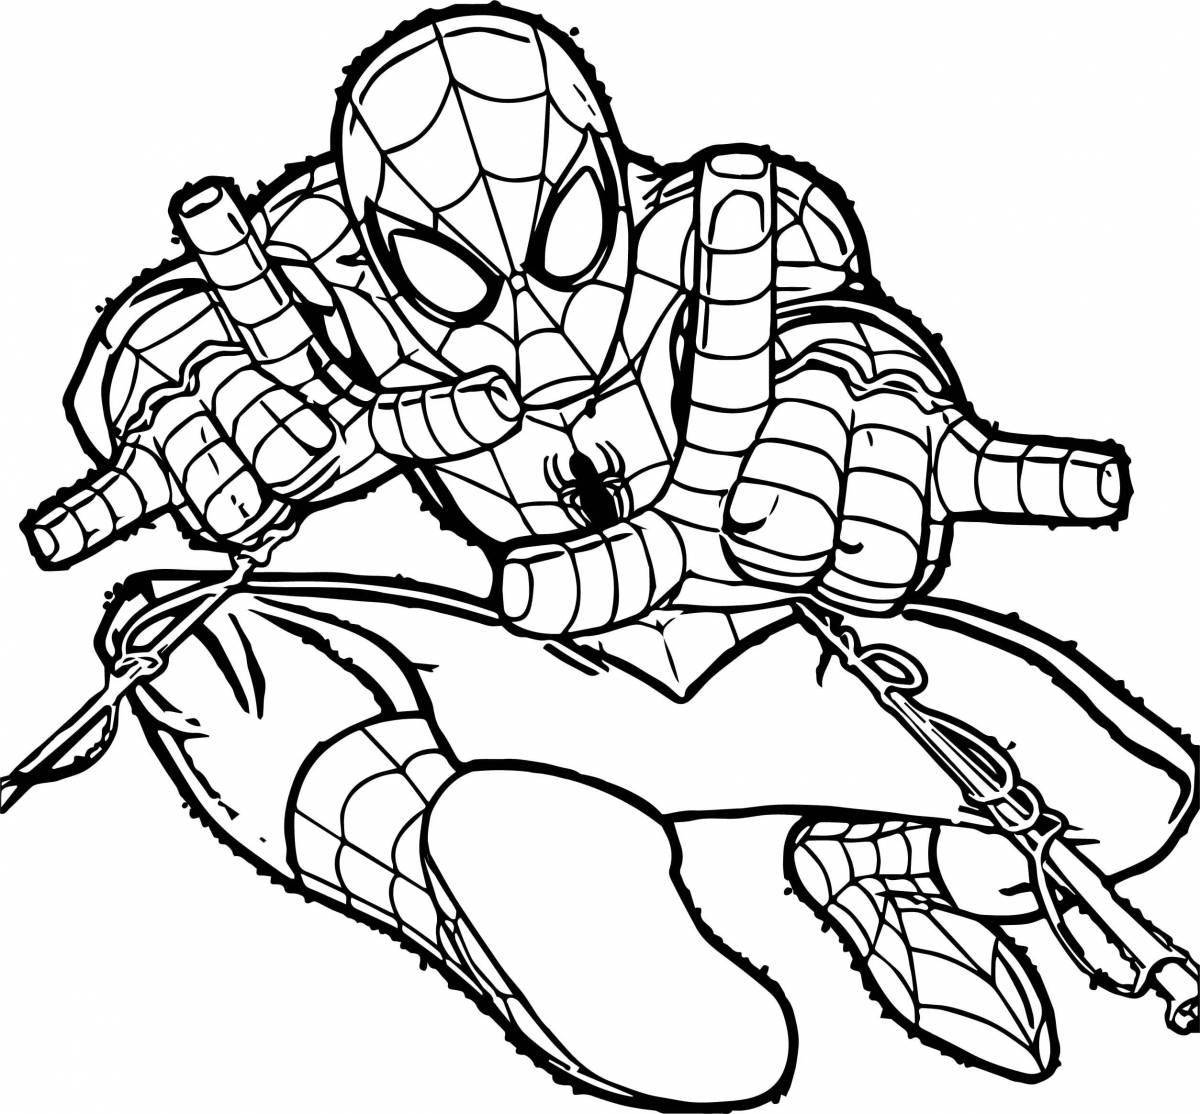 Spider-man colorful coloring book for kids